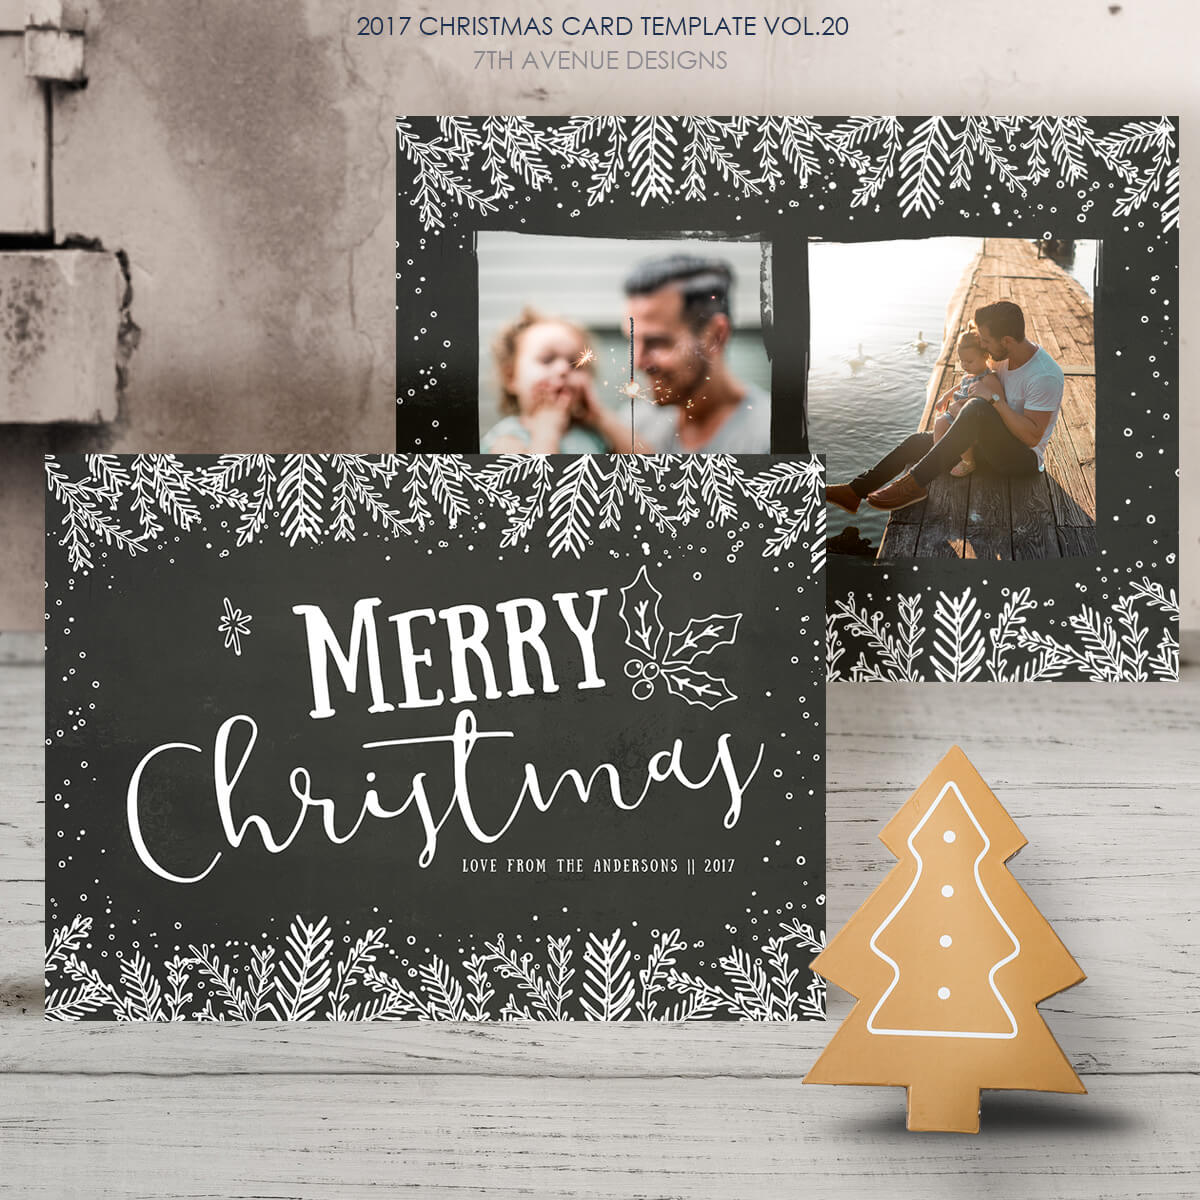 015 Template Ideas Photo Christmas Card Impressive Templates Intended For Free Photoshop Christmas Card Templates For Photographers